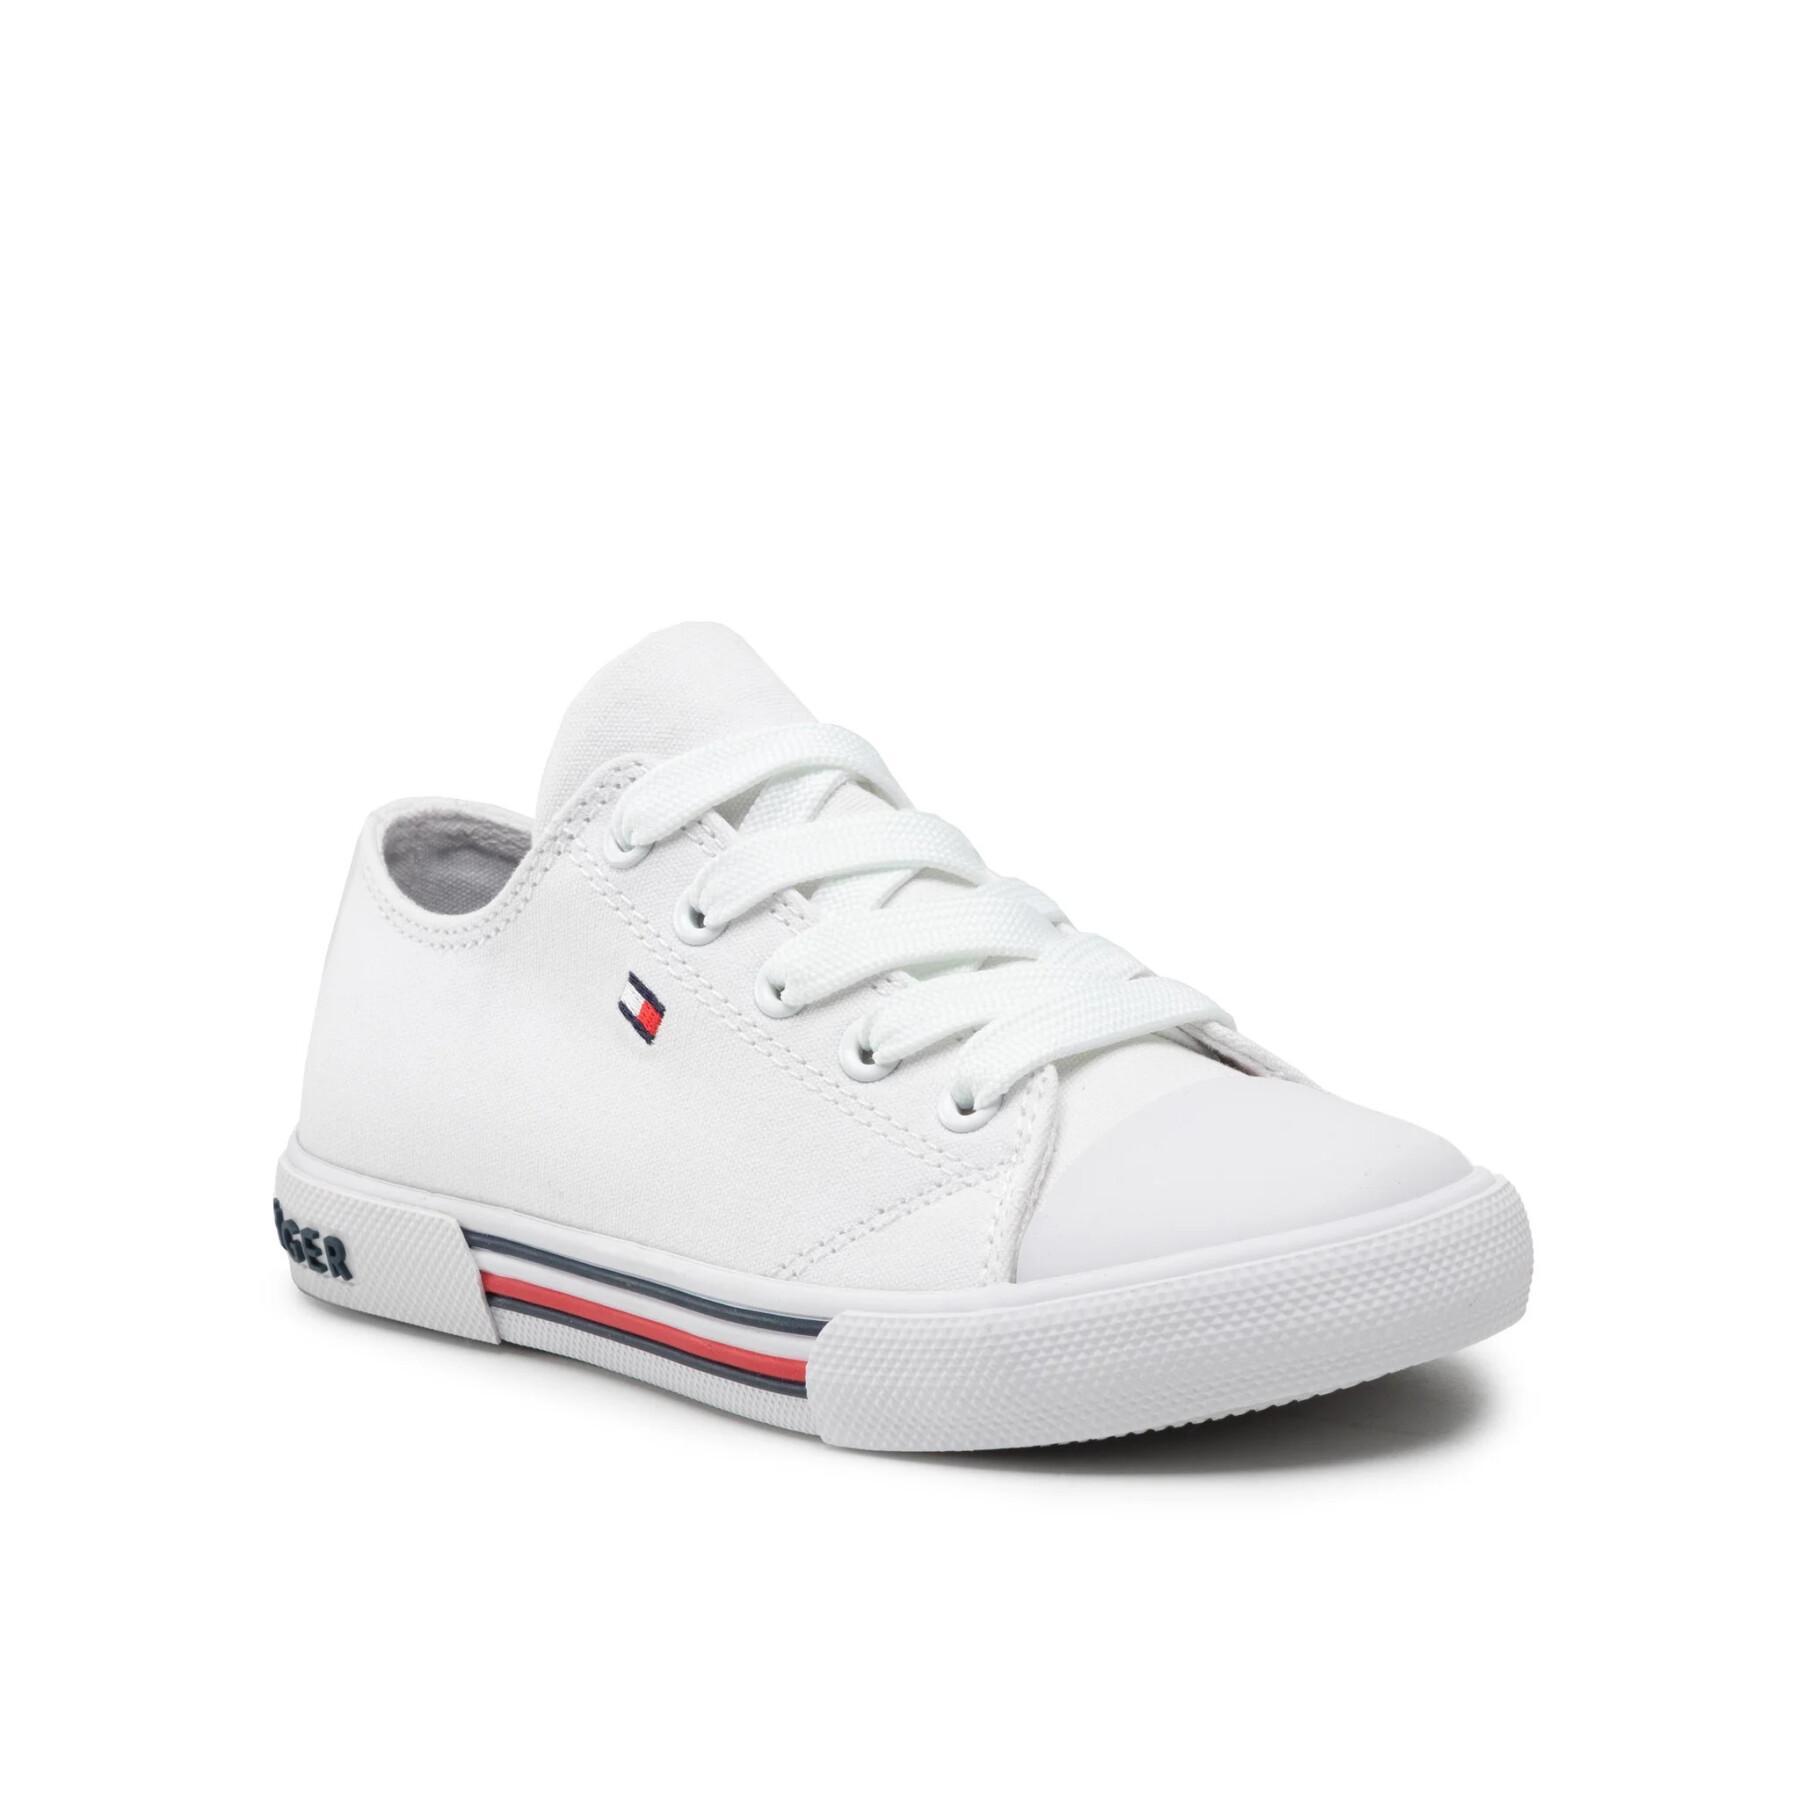 Women's sneakers Tommy Hilfiger White